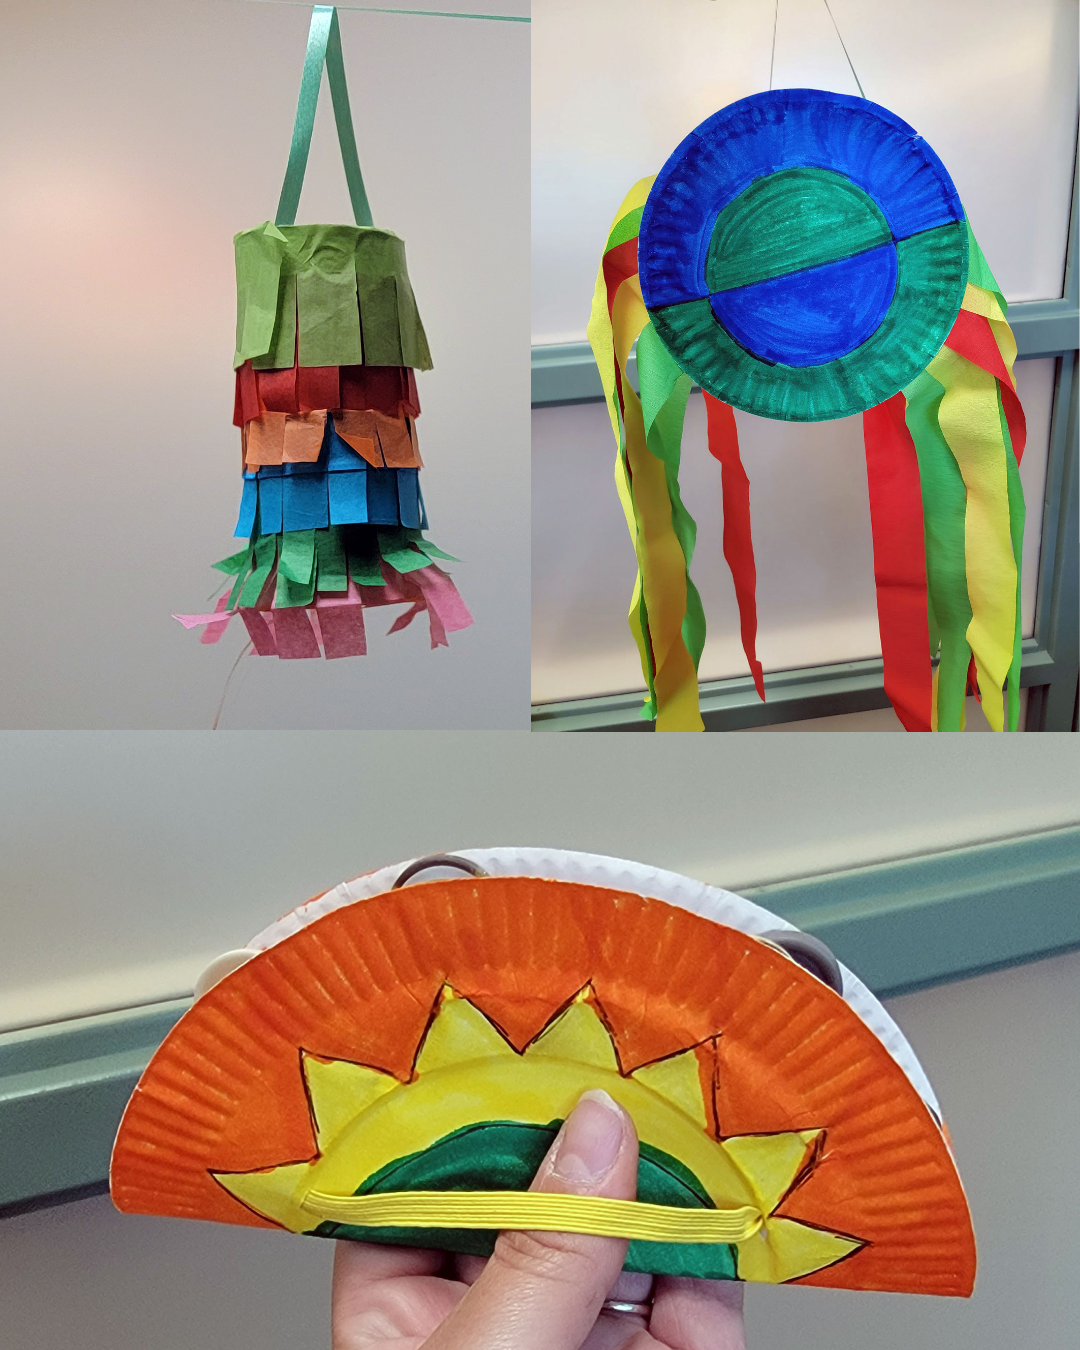 A collaged photo of a lantern-shaped pinata, a "kite" made from a paper plate and streamers, and a "castanet" made from a paper plate and buttons